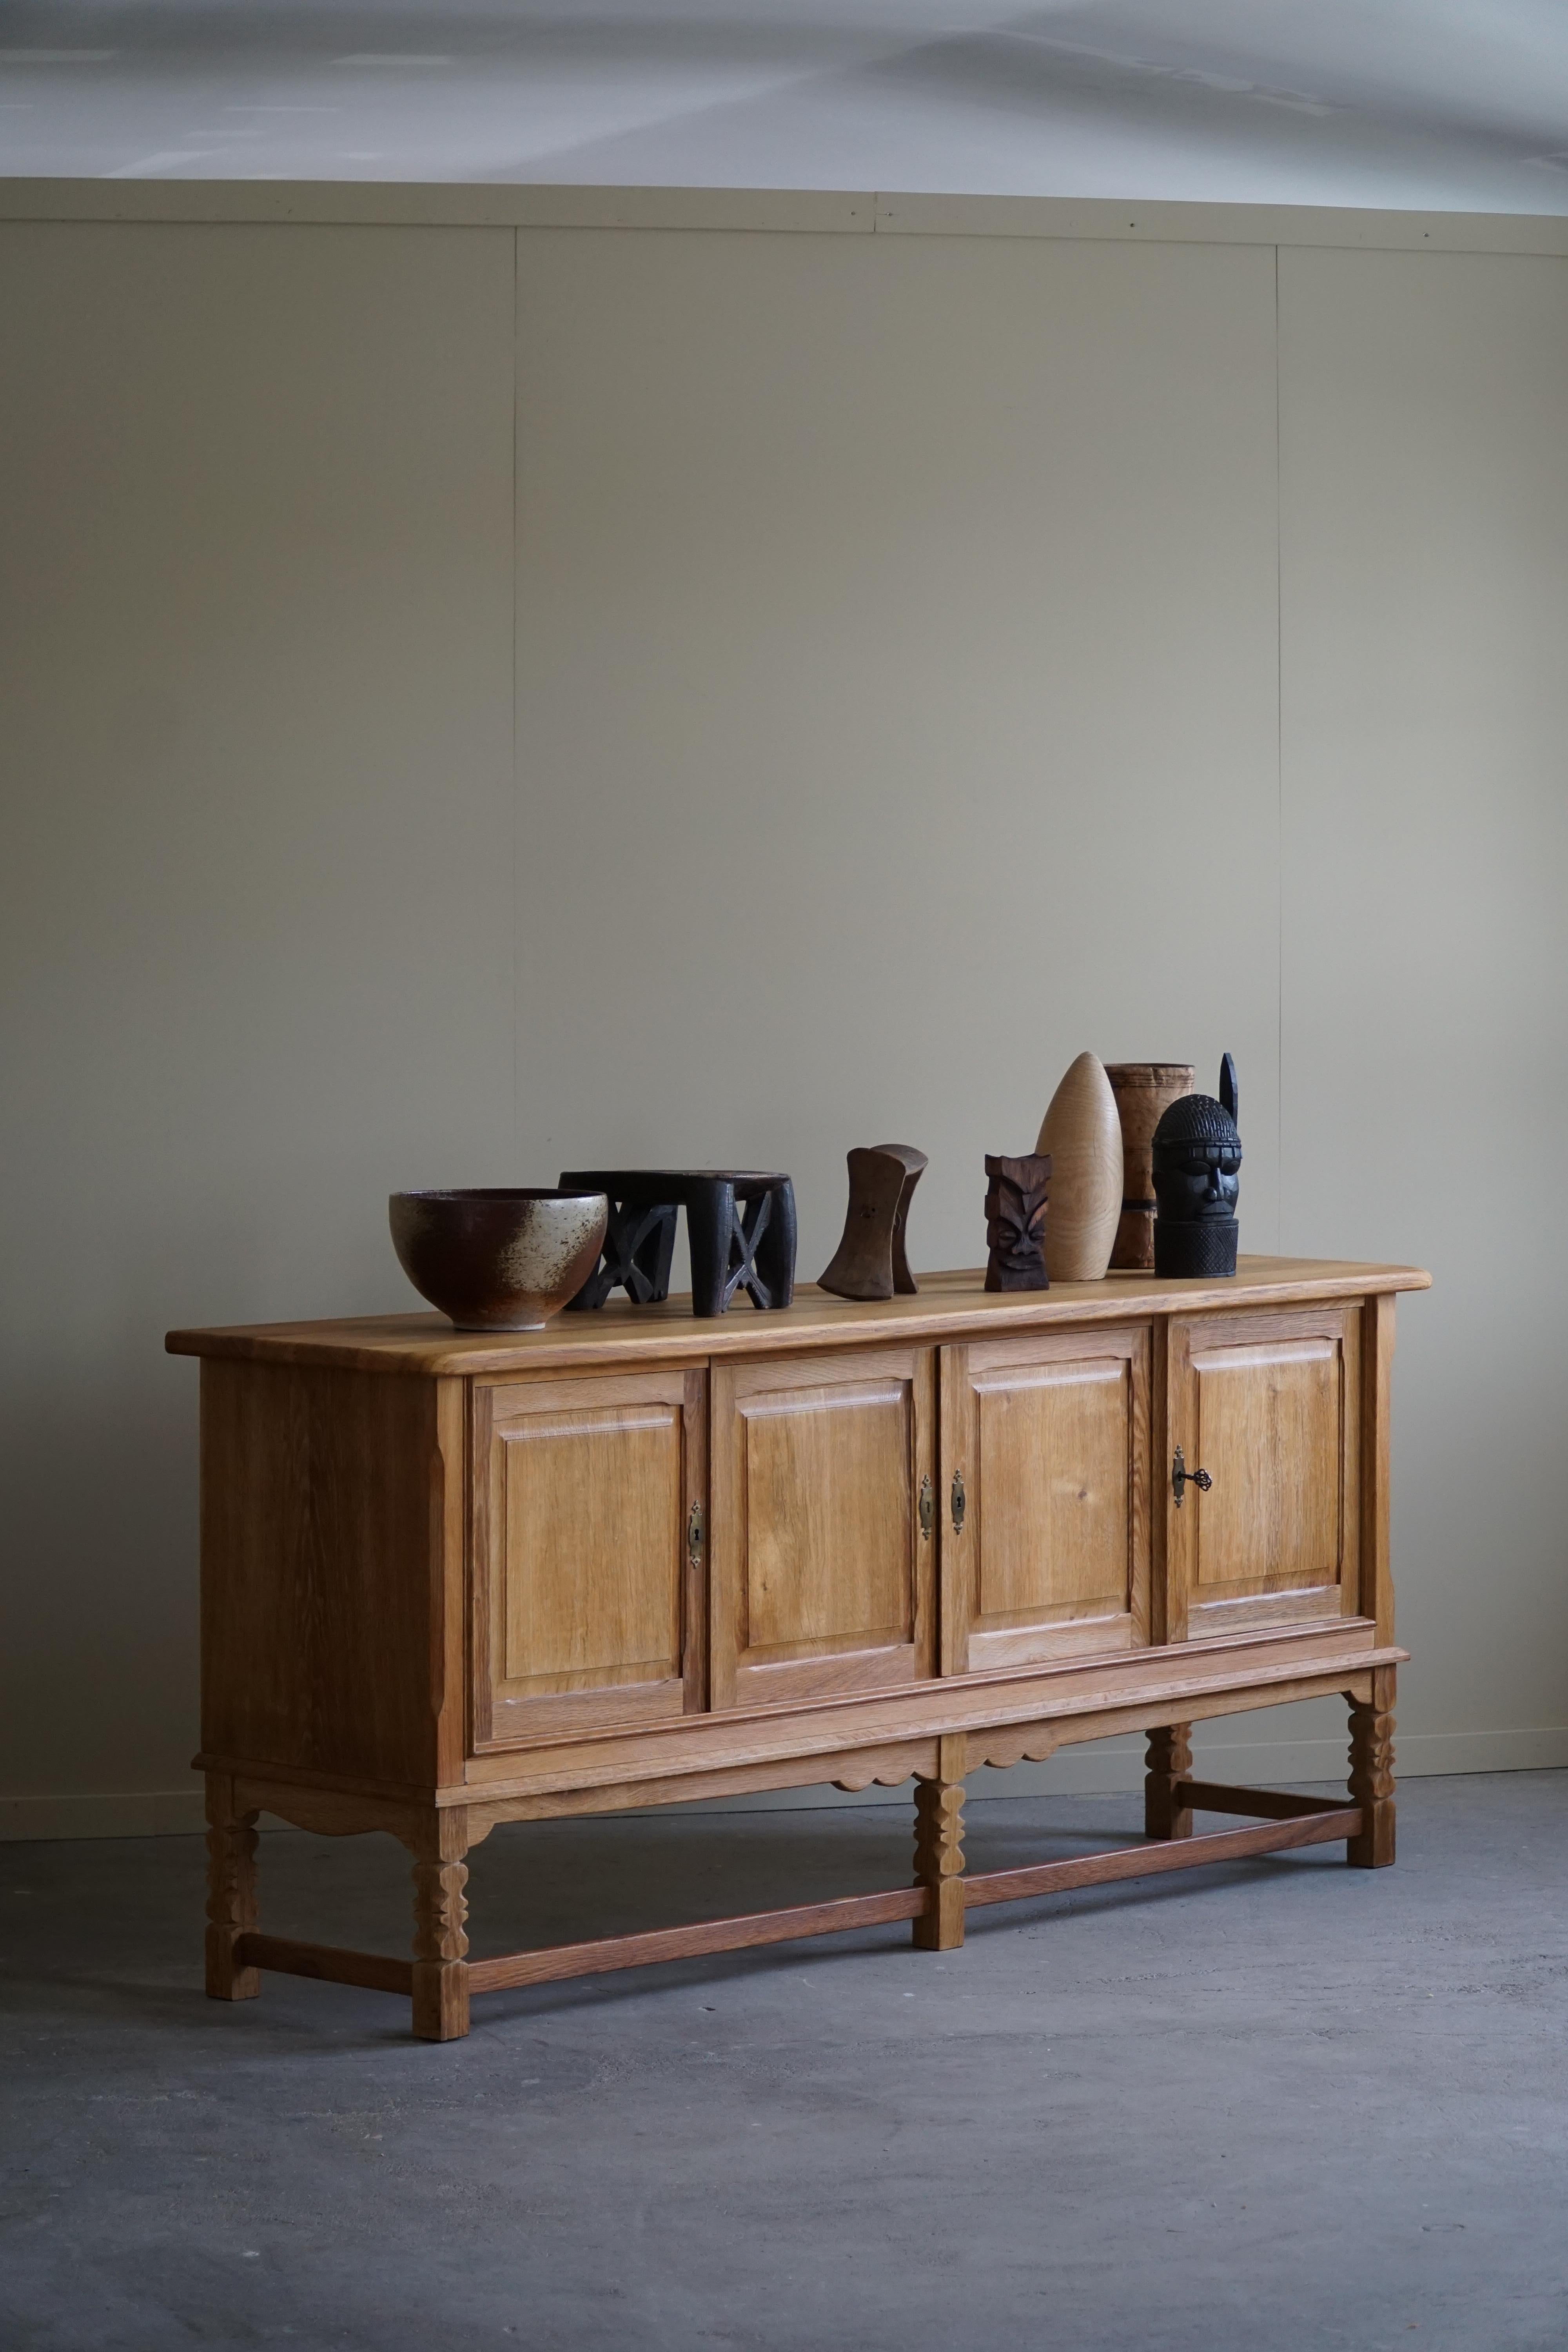 Introducing a timeless sideboard crafted by a Danish cabinetmaker in the mid-century era of the 1960s. This elegant and functional piece embodies the Scandinavian design principles of simplicity, functionality, and natural materials, making it an